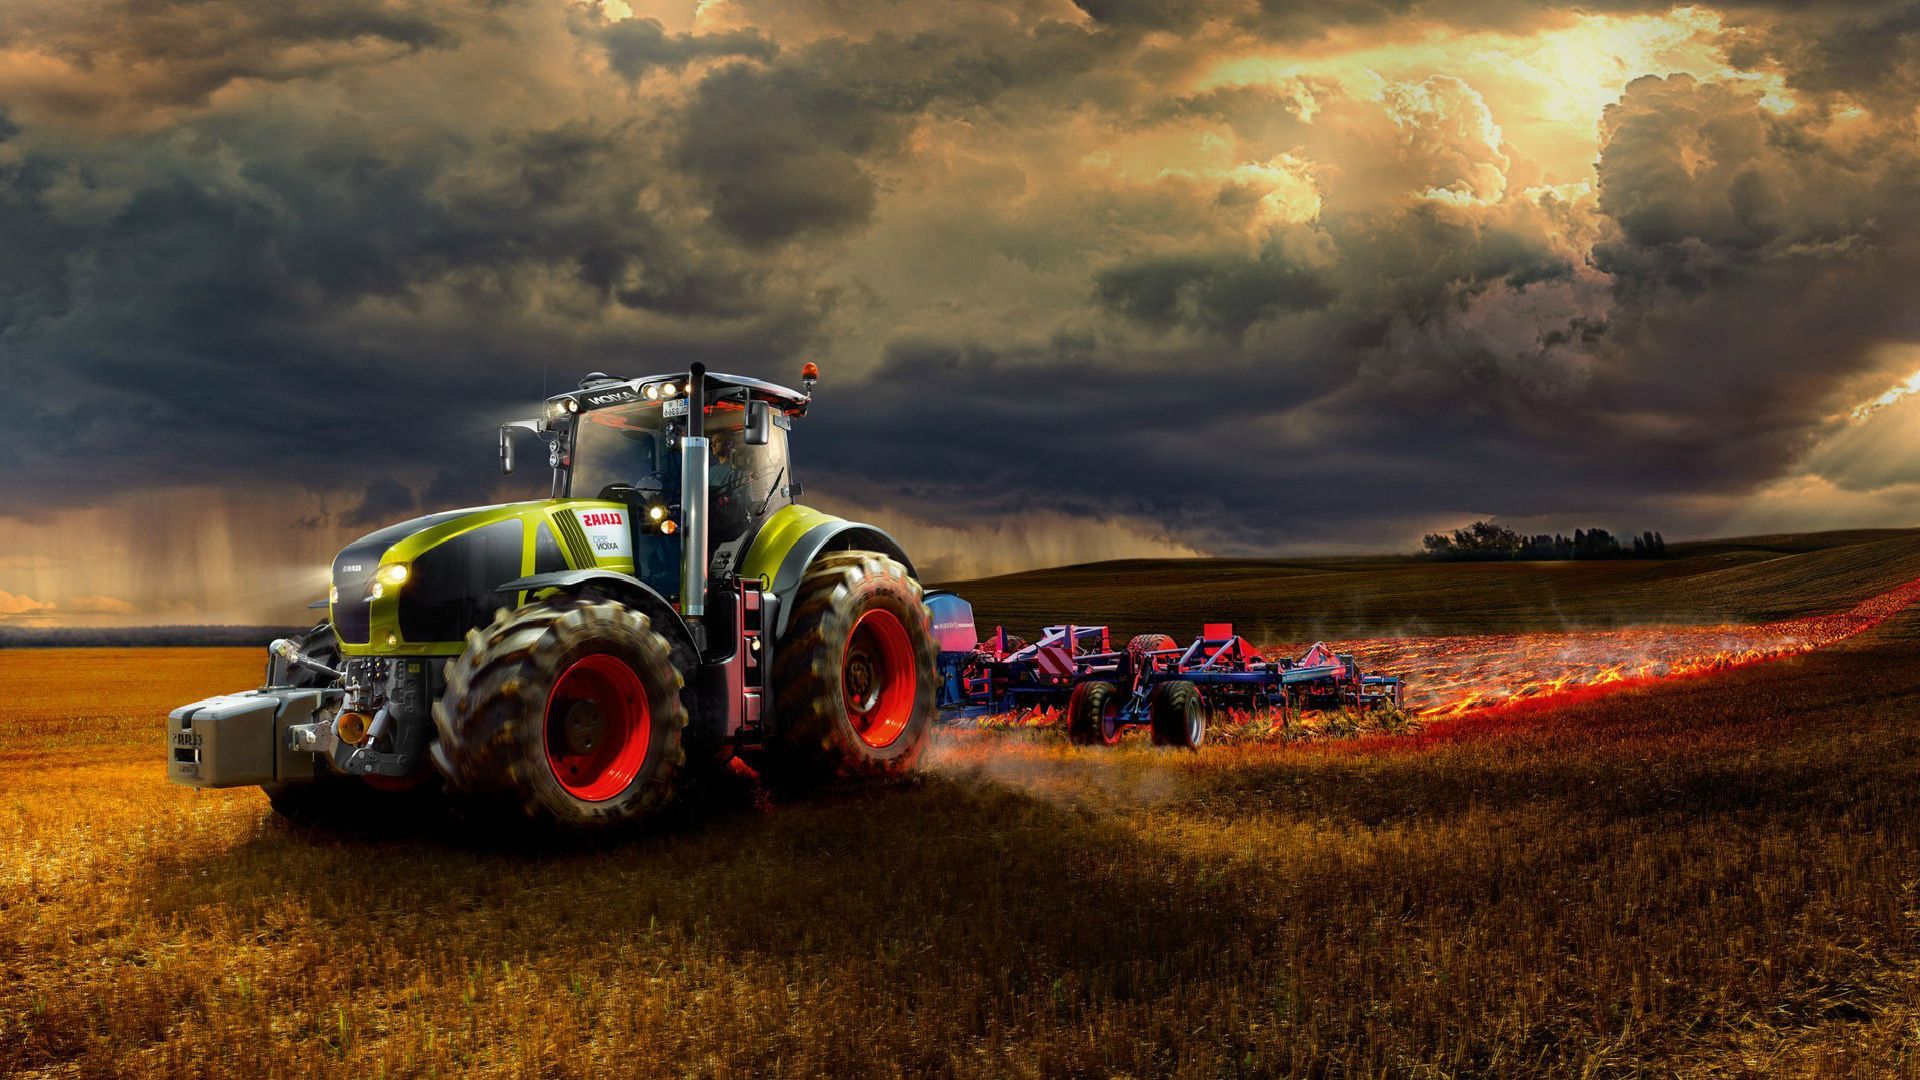 Tractor working on the fire field wallpaper 41422